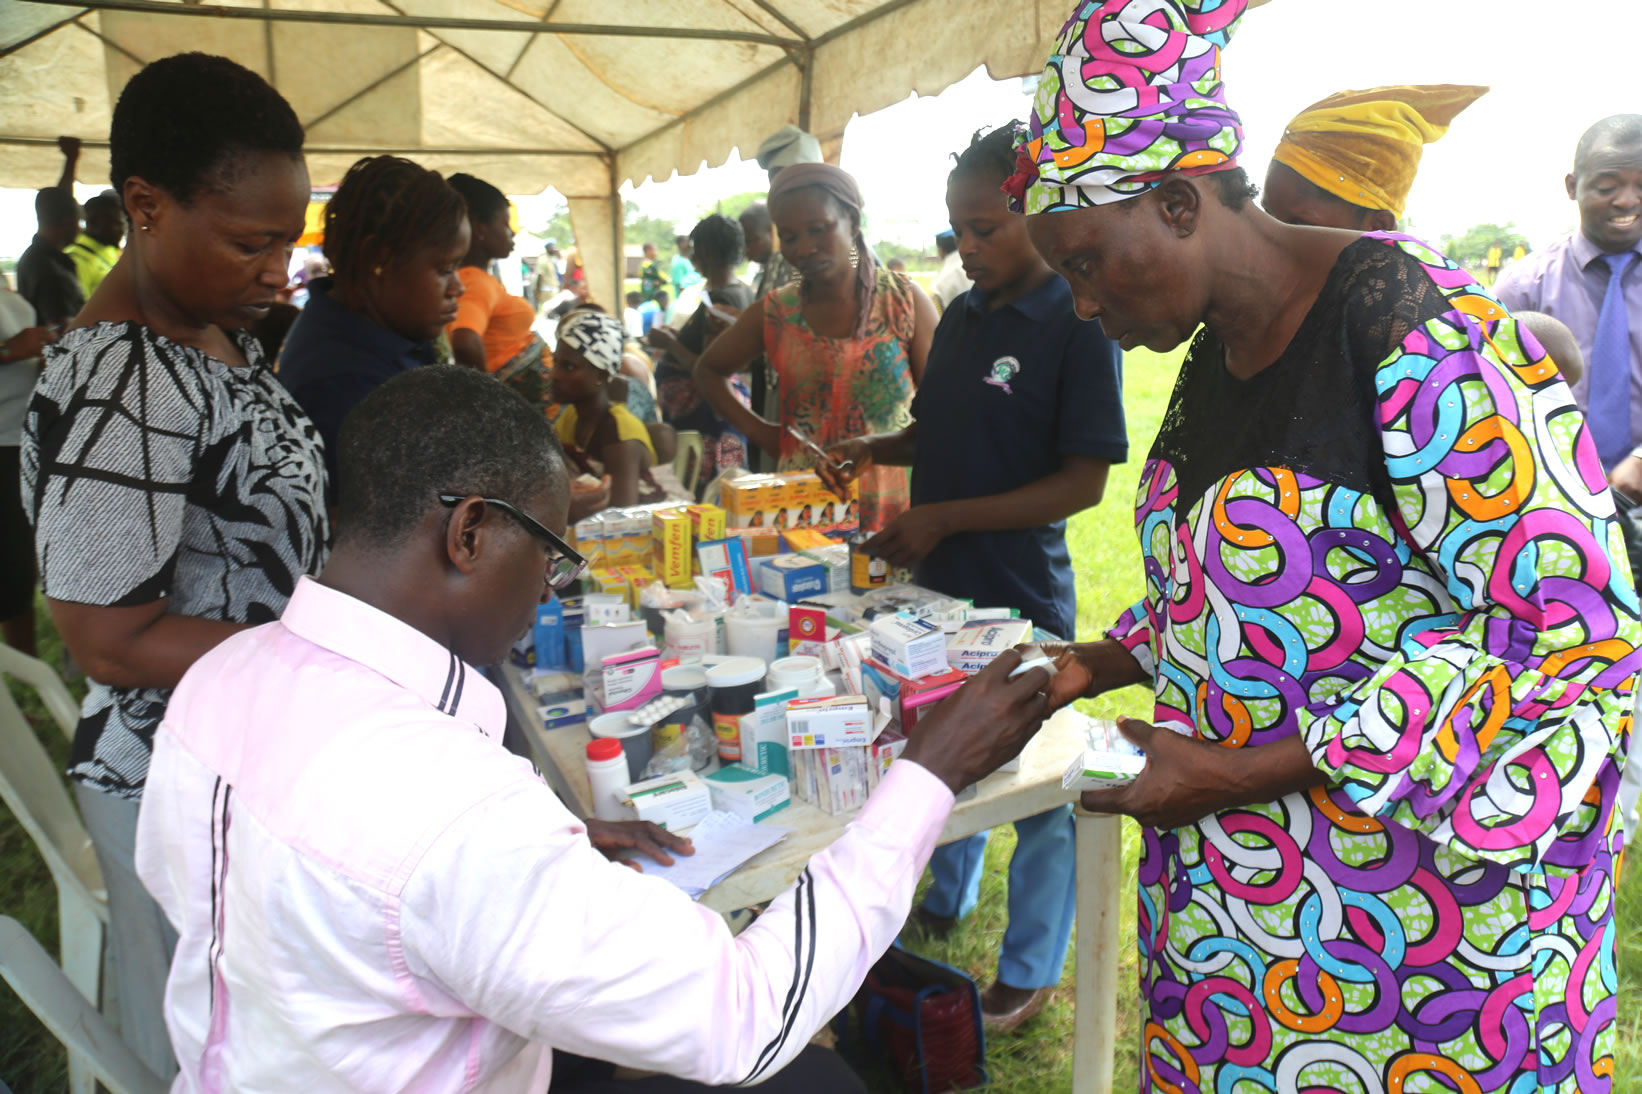 A pharmacist from Covenant University Health Centre, dipspensing some drugs to a beneficiary at one of Covenant University's community impact outreach at Iju